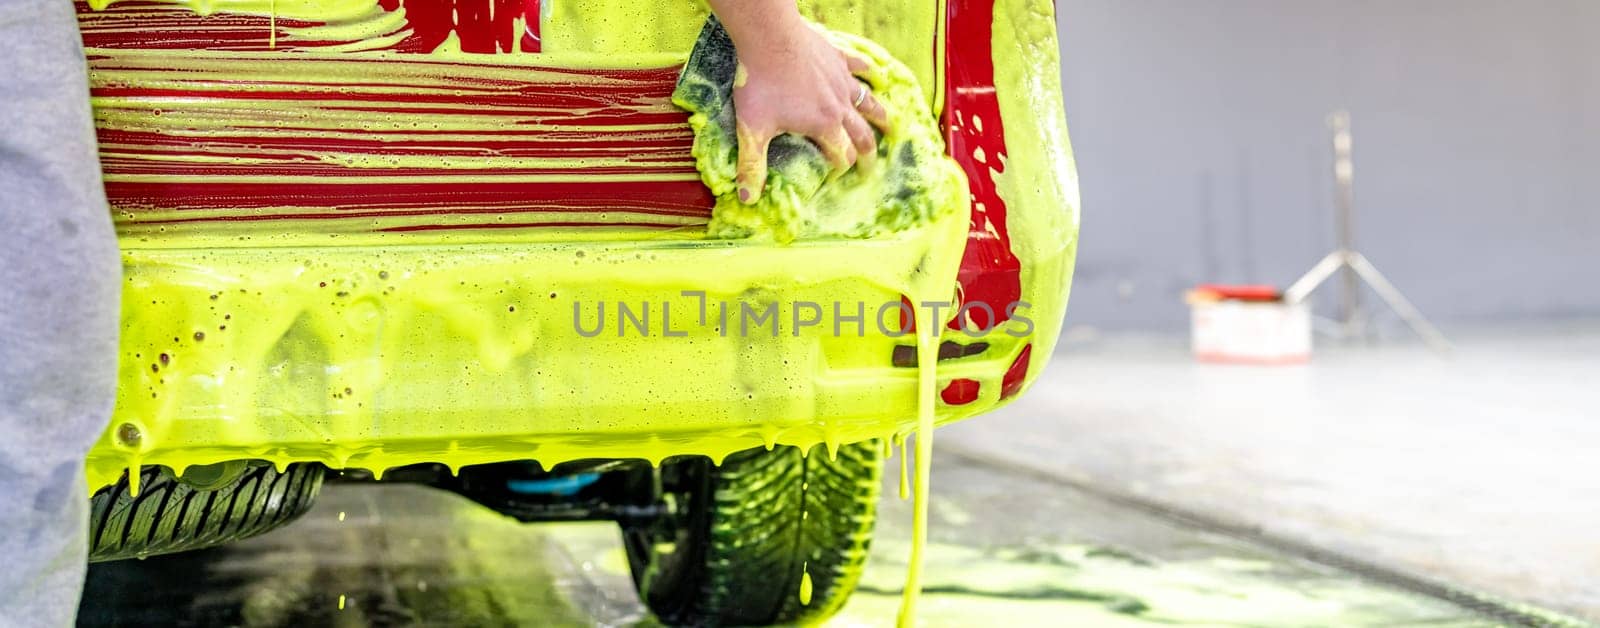 wash cars with green active foam in the garage by Edophoto